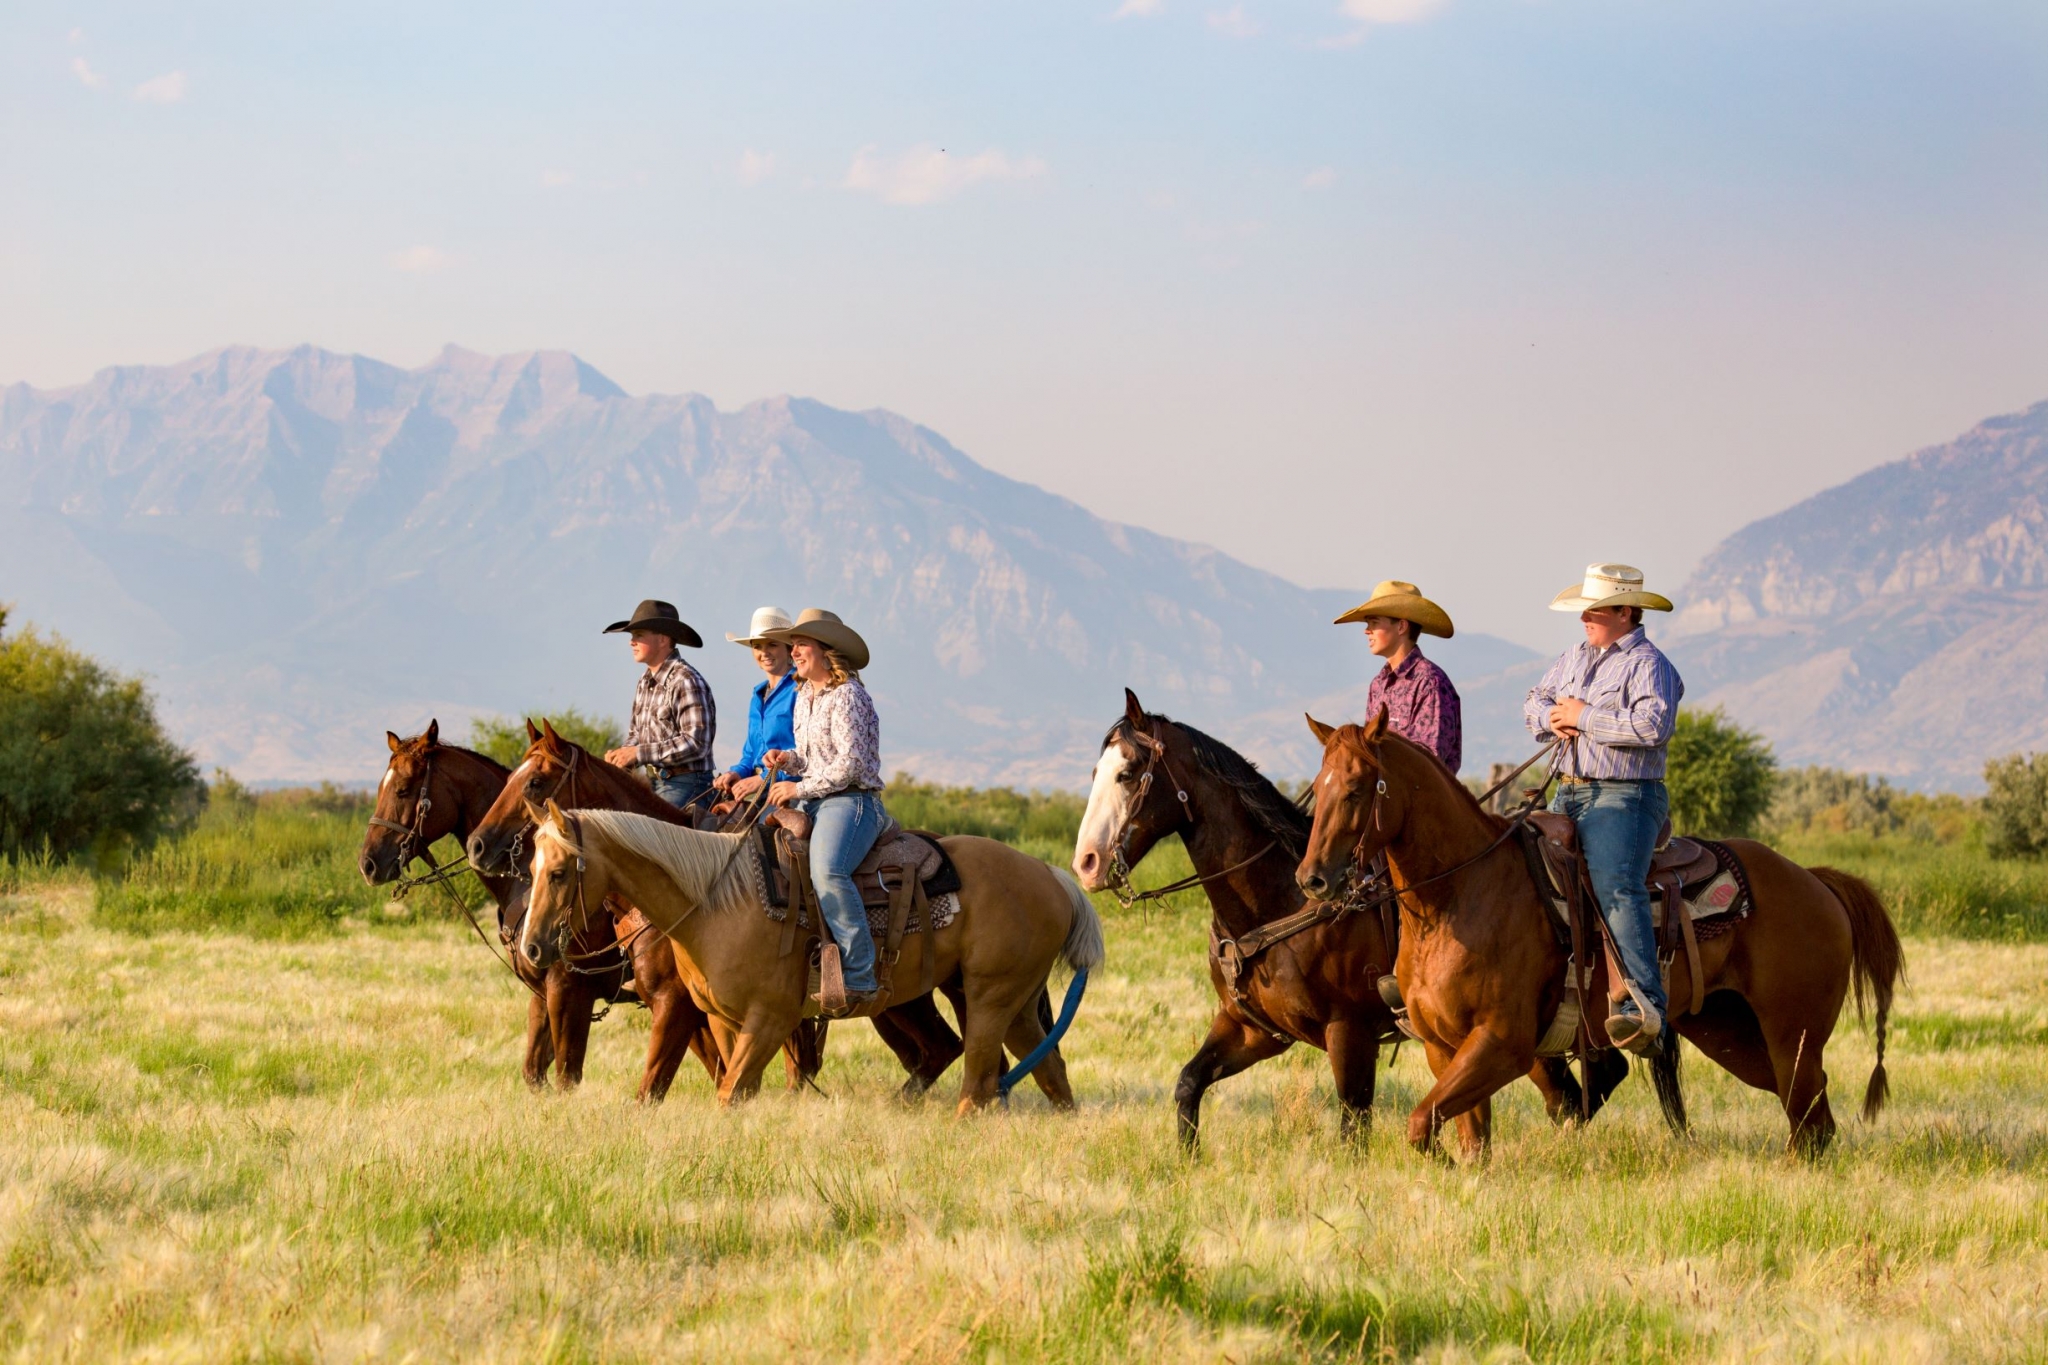 A gang of ranch hands set off on their next adventure.